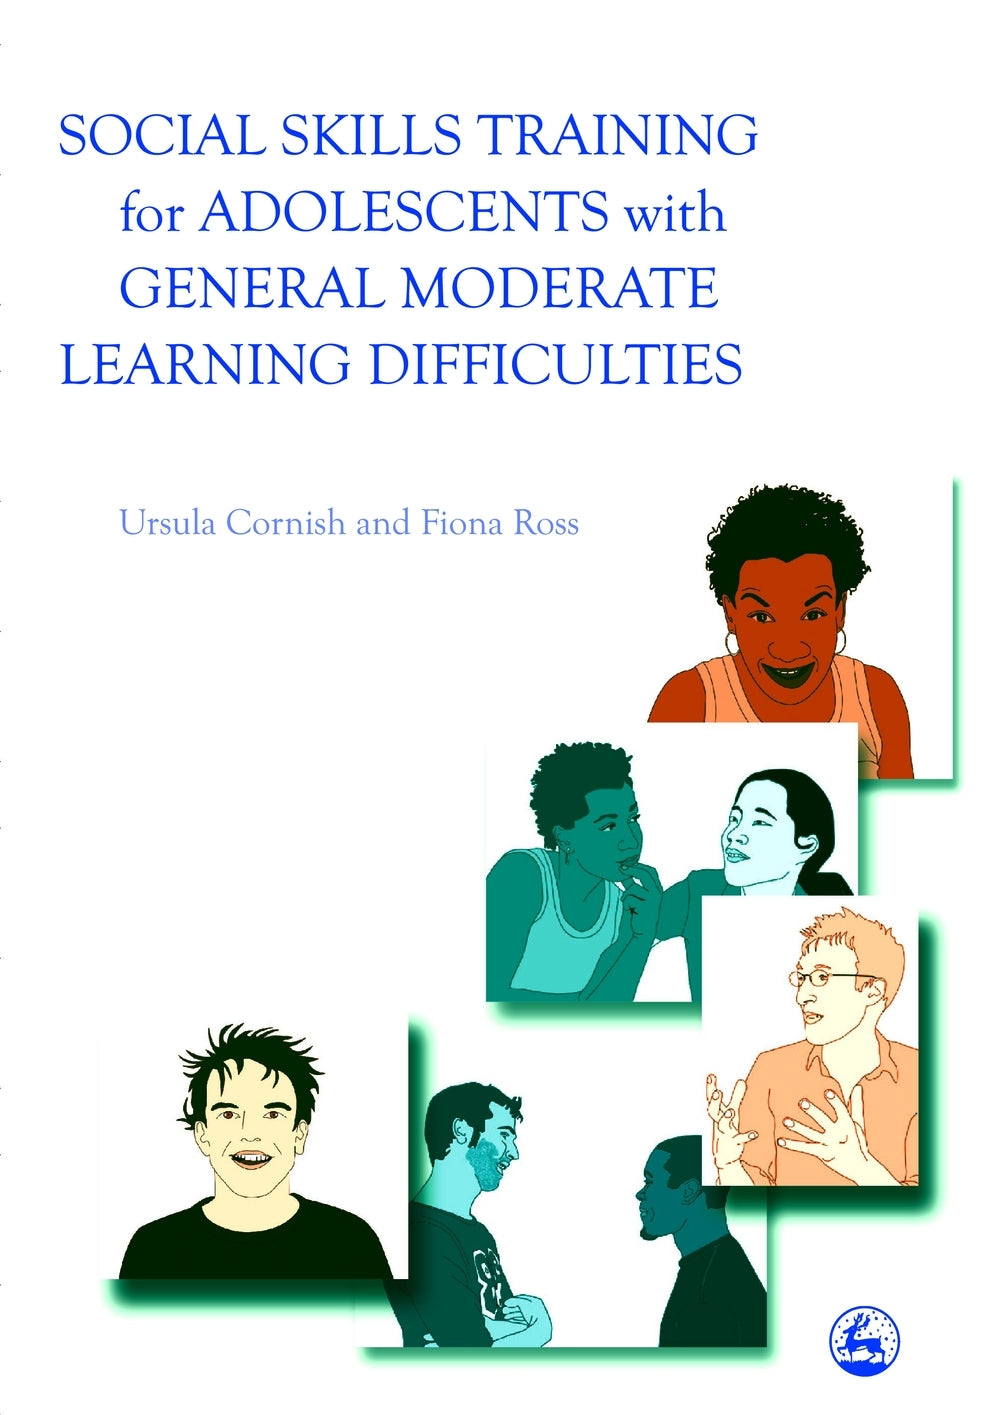 Social Skills Training for Adolescents with General Moderate Learning Difficulties by Fiona Ross, Ursula Cornish